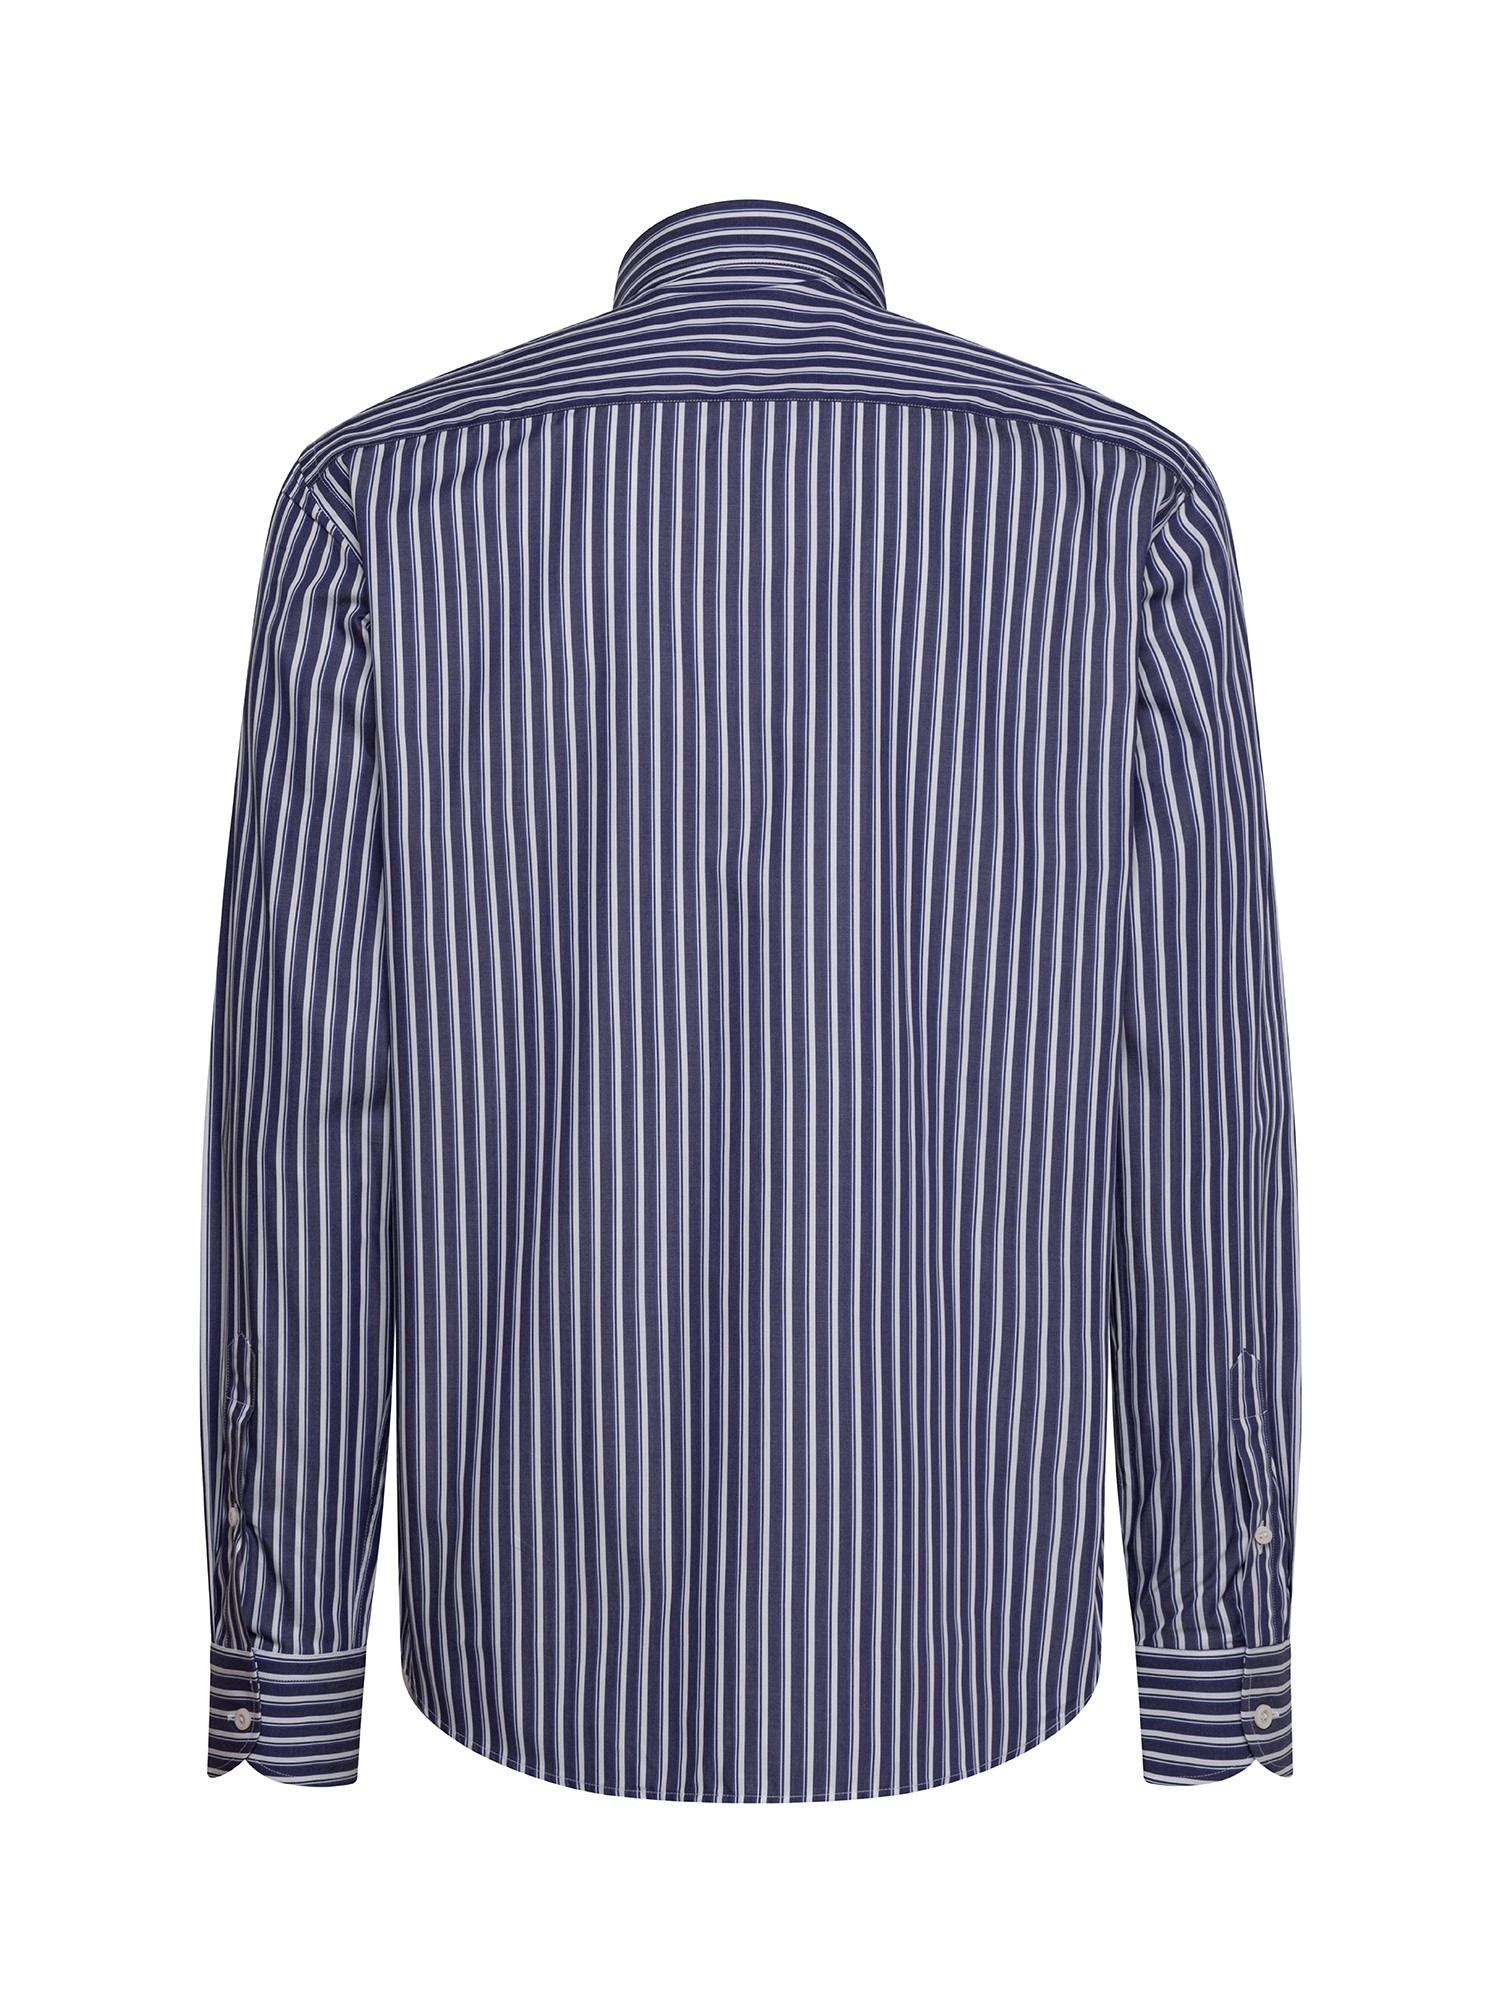 Luca D'Altieri - Tailor fit striped shirt in pure cotton, Blue, large image number 2